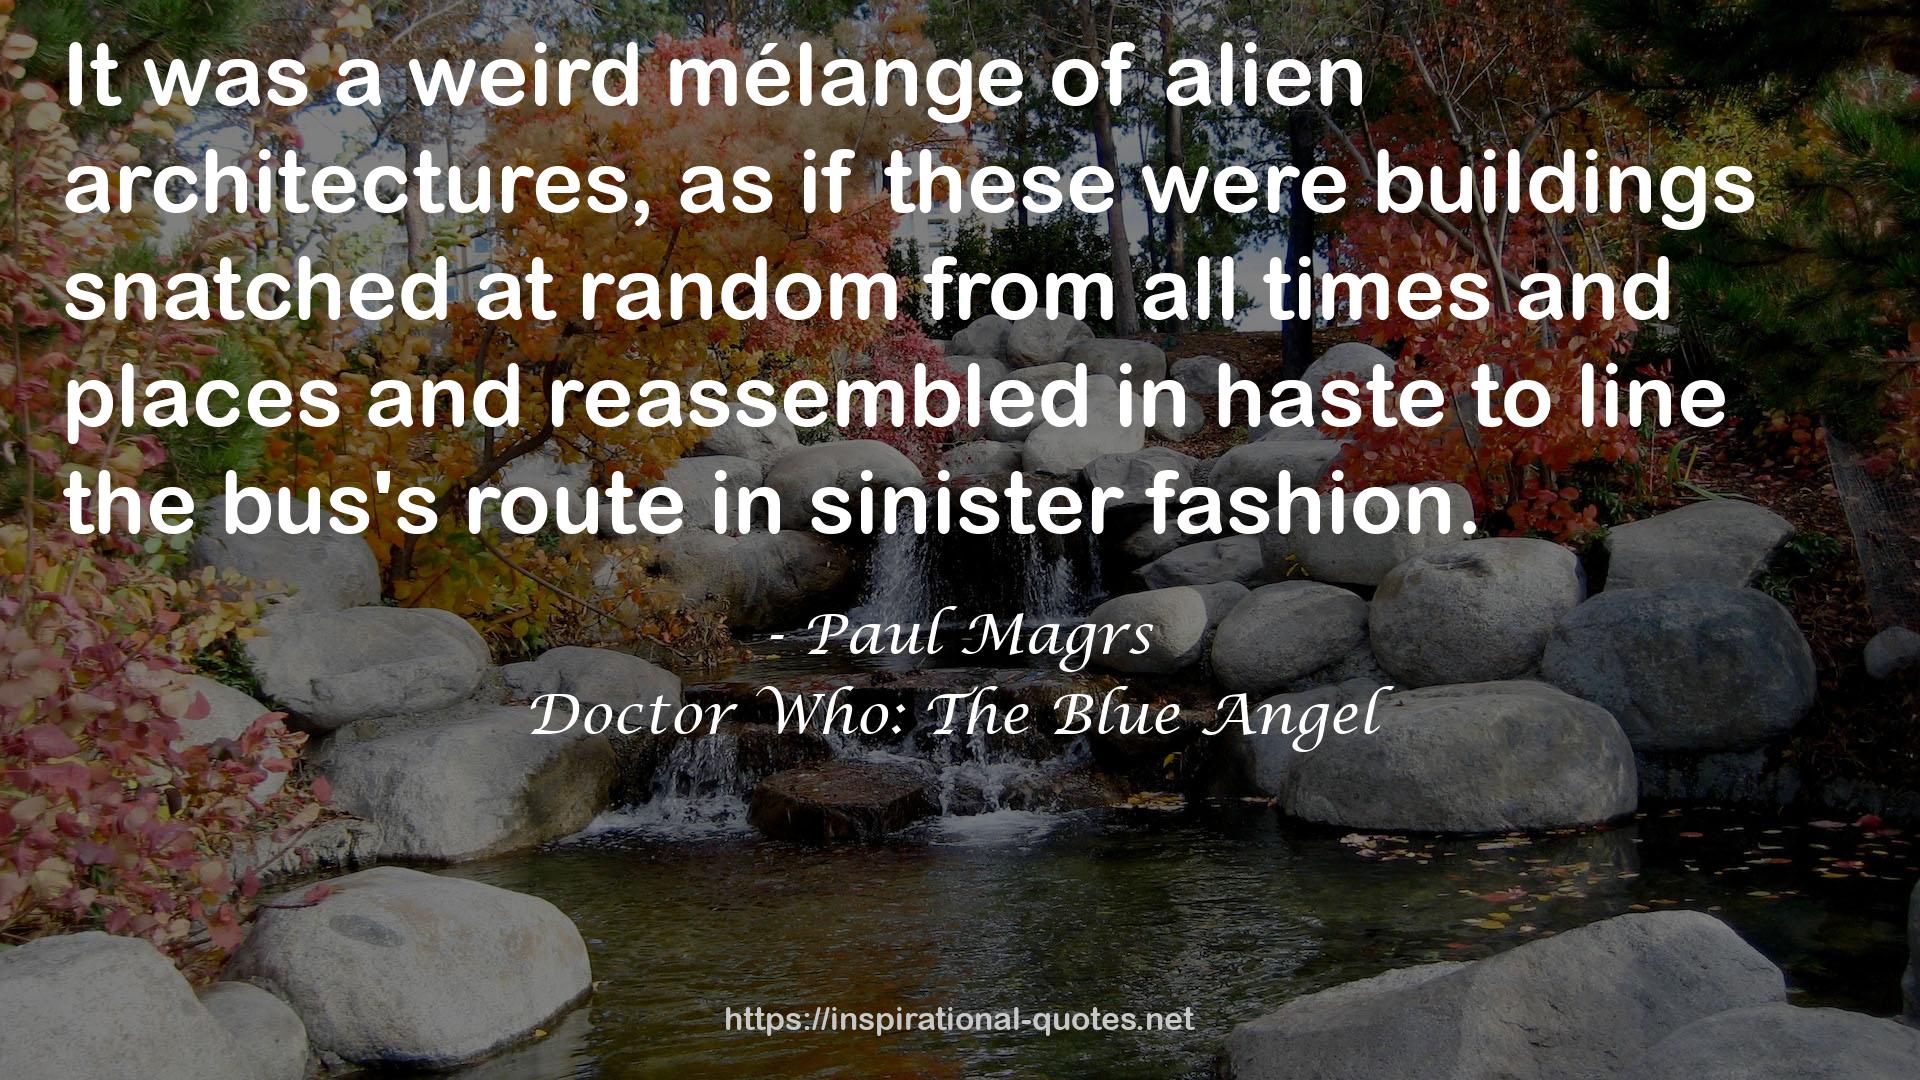 Doctor Who: The Blue Angel QUOTES